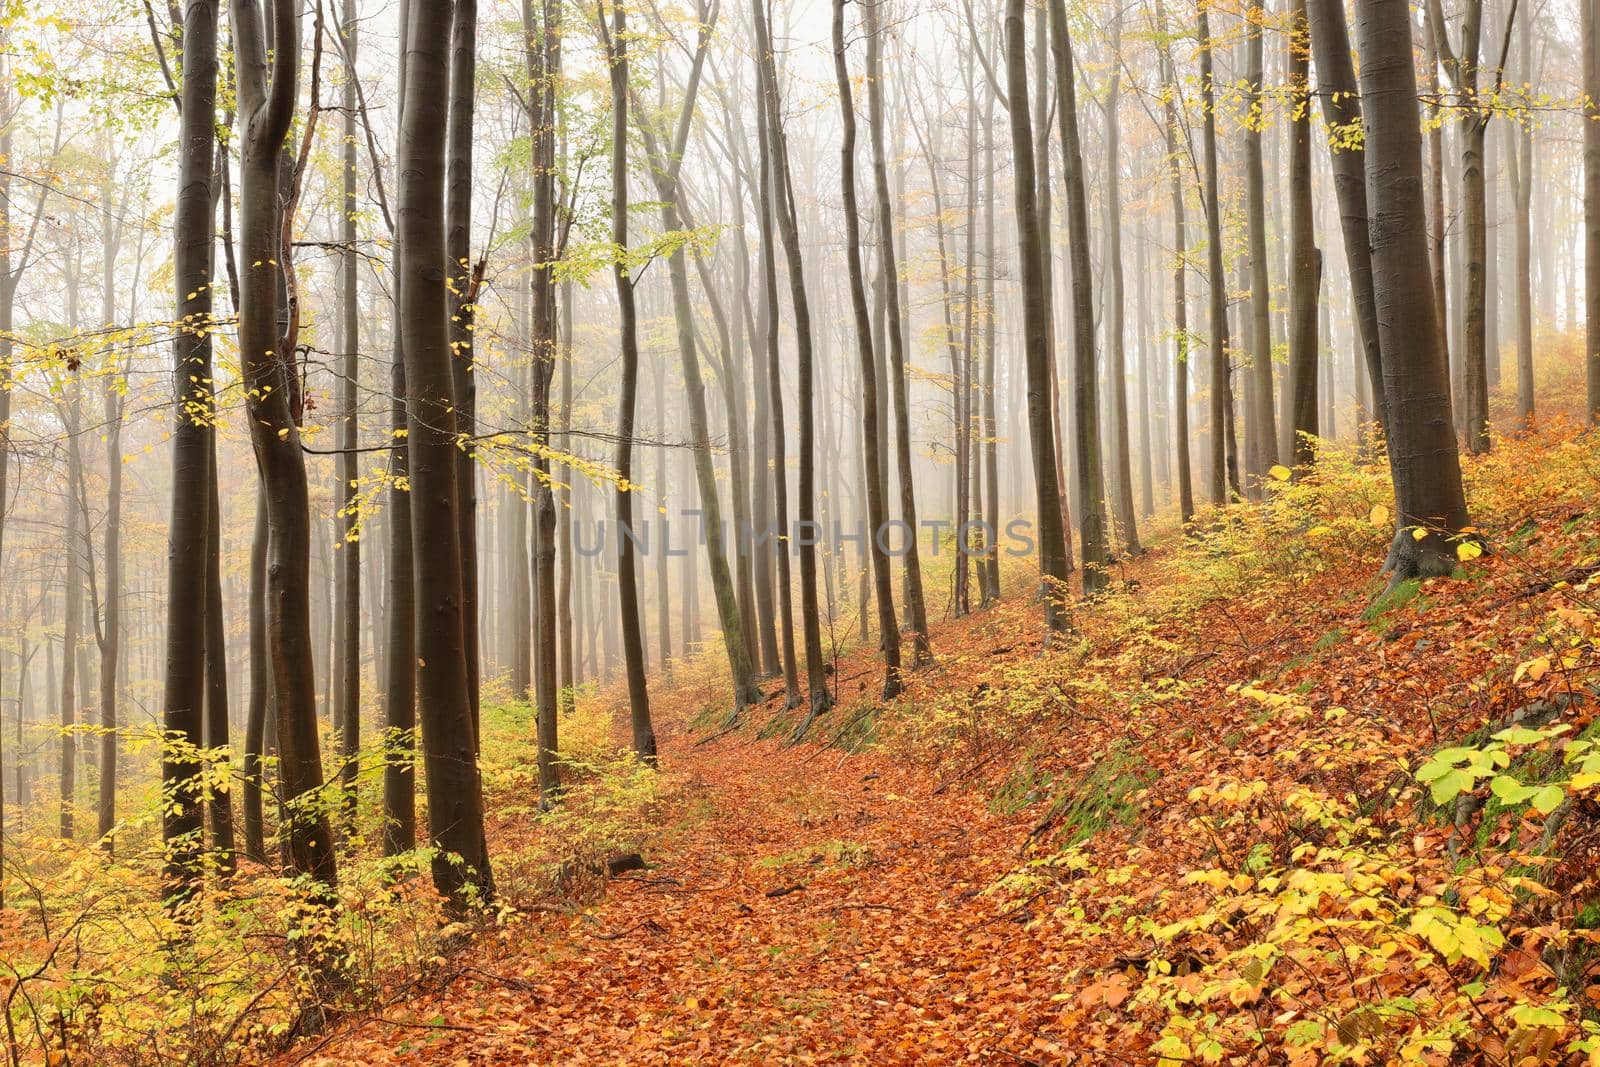 Beech trees in autumn forest by nature78